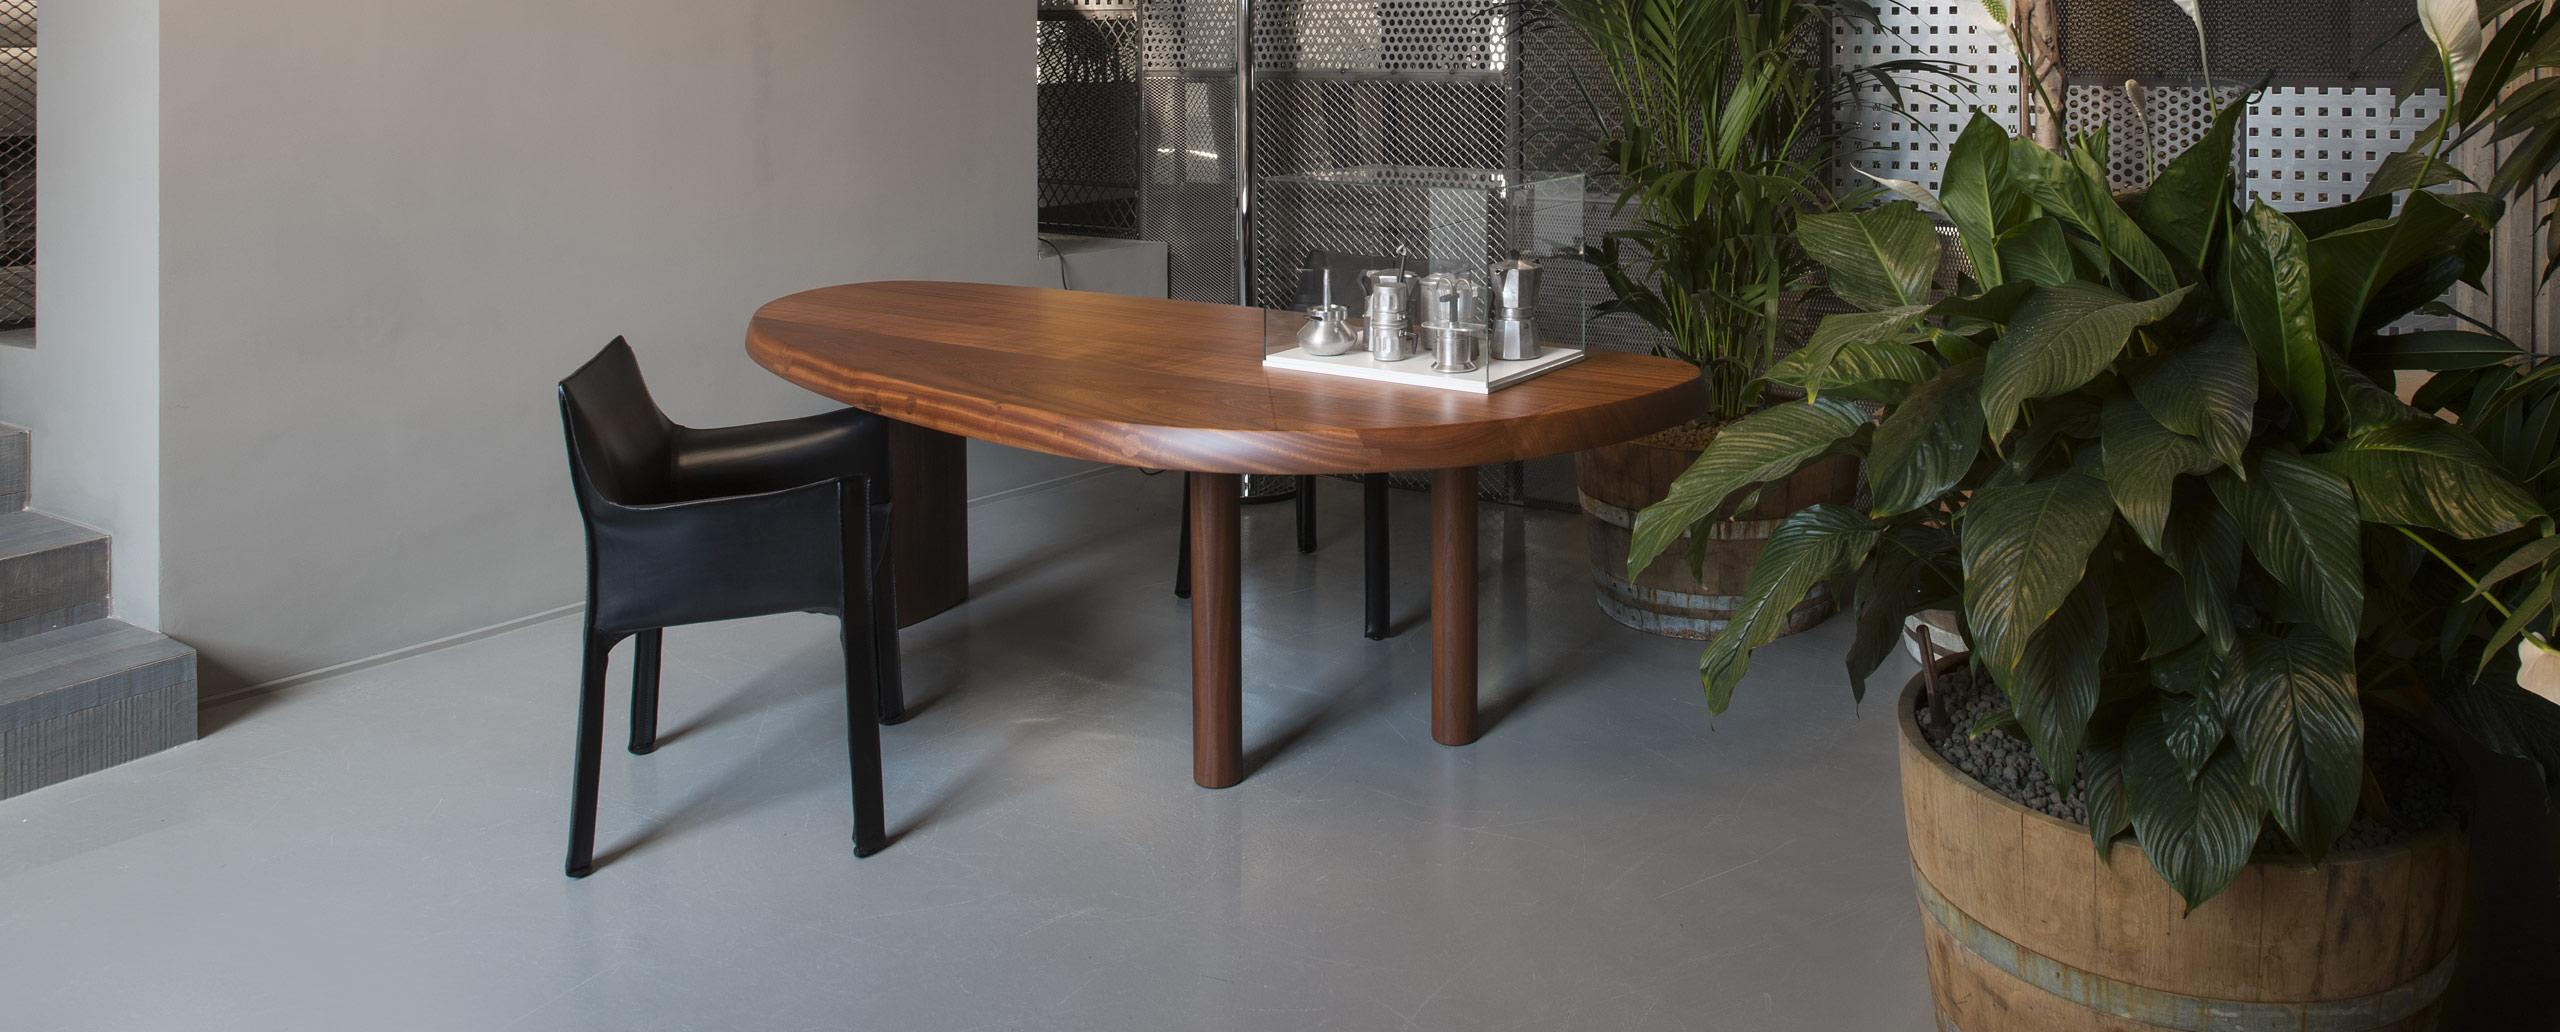 Charlotte Perriand Table En Forme Libre, Lacquered Wood by Cassina 1